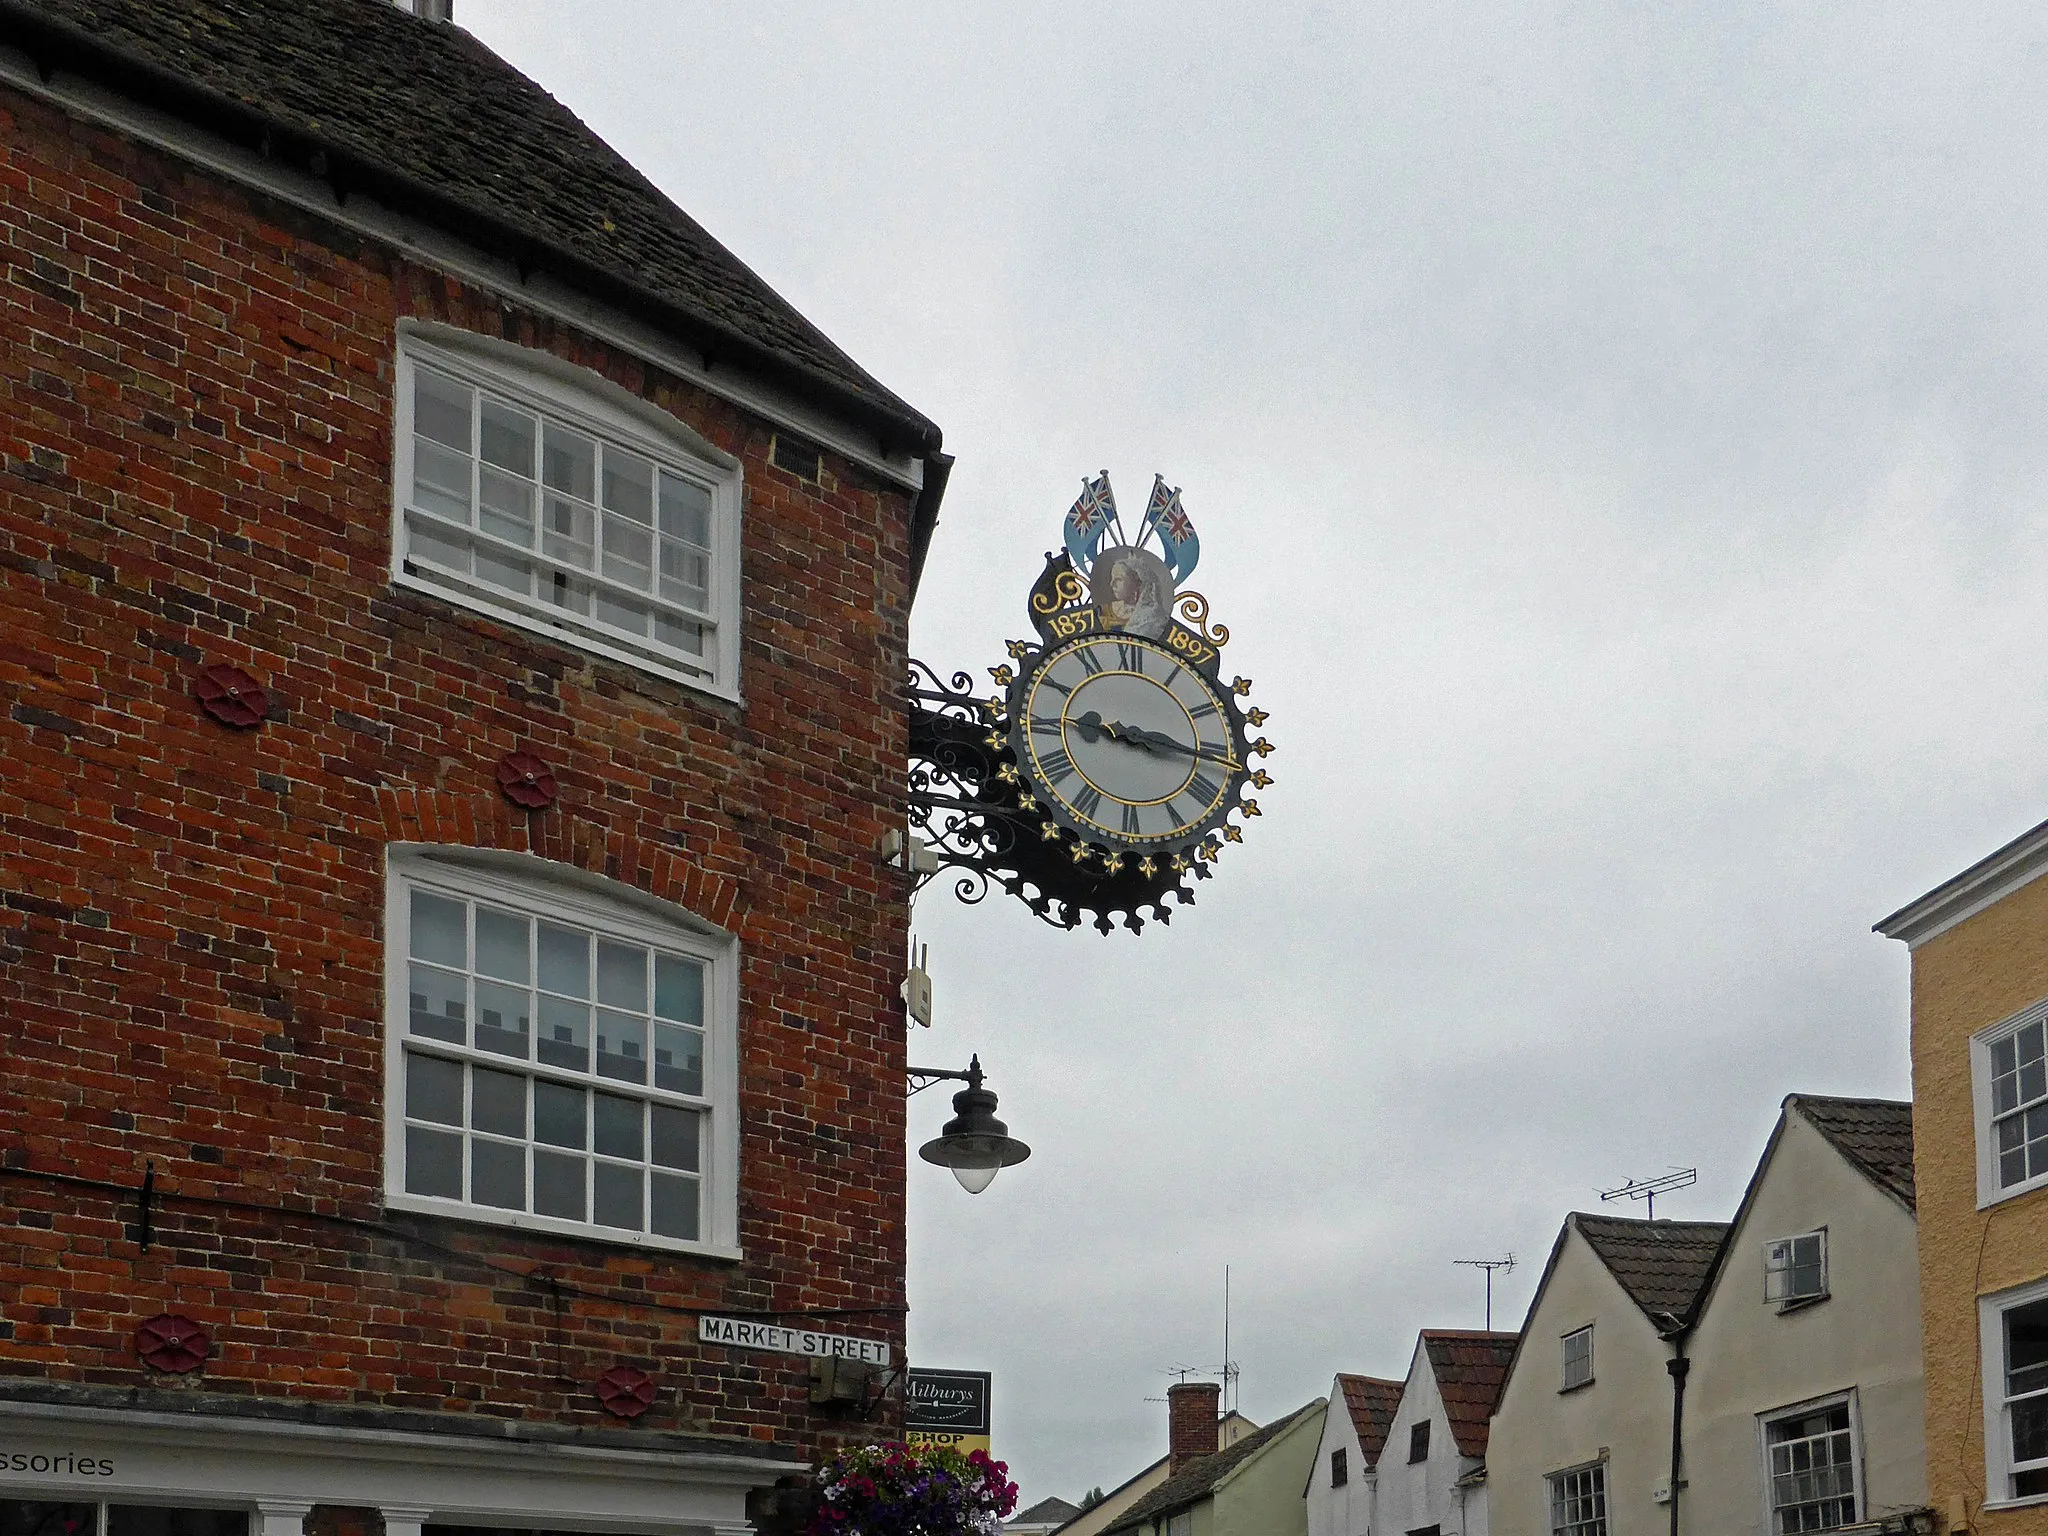 Photo showing: The Tolsey clock commemorates the Diamond Jubilee (60 years) of Queen Victoria's reign. The clock says "1837 - 1897". It lies between Market Street and High Street in Wotton-under-Edge, Gloucestershire, England.